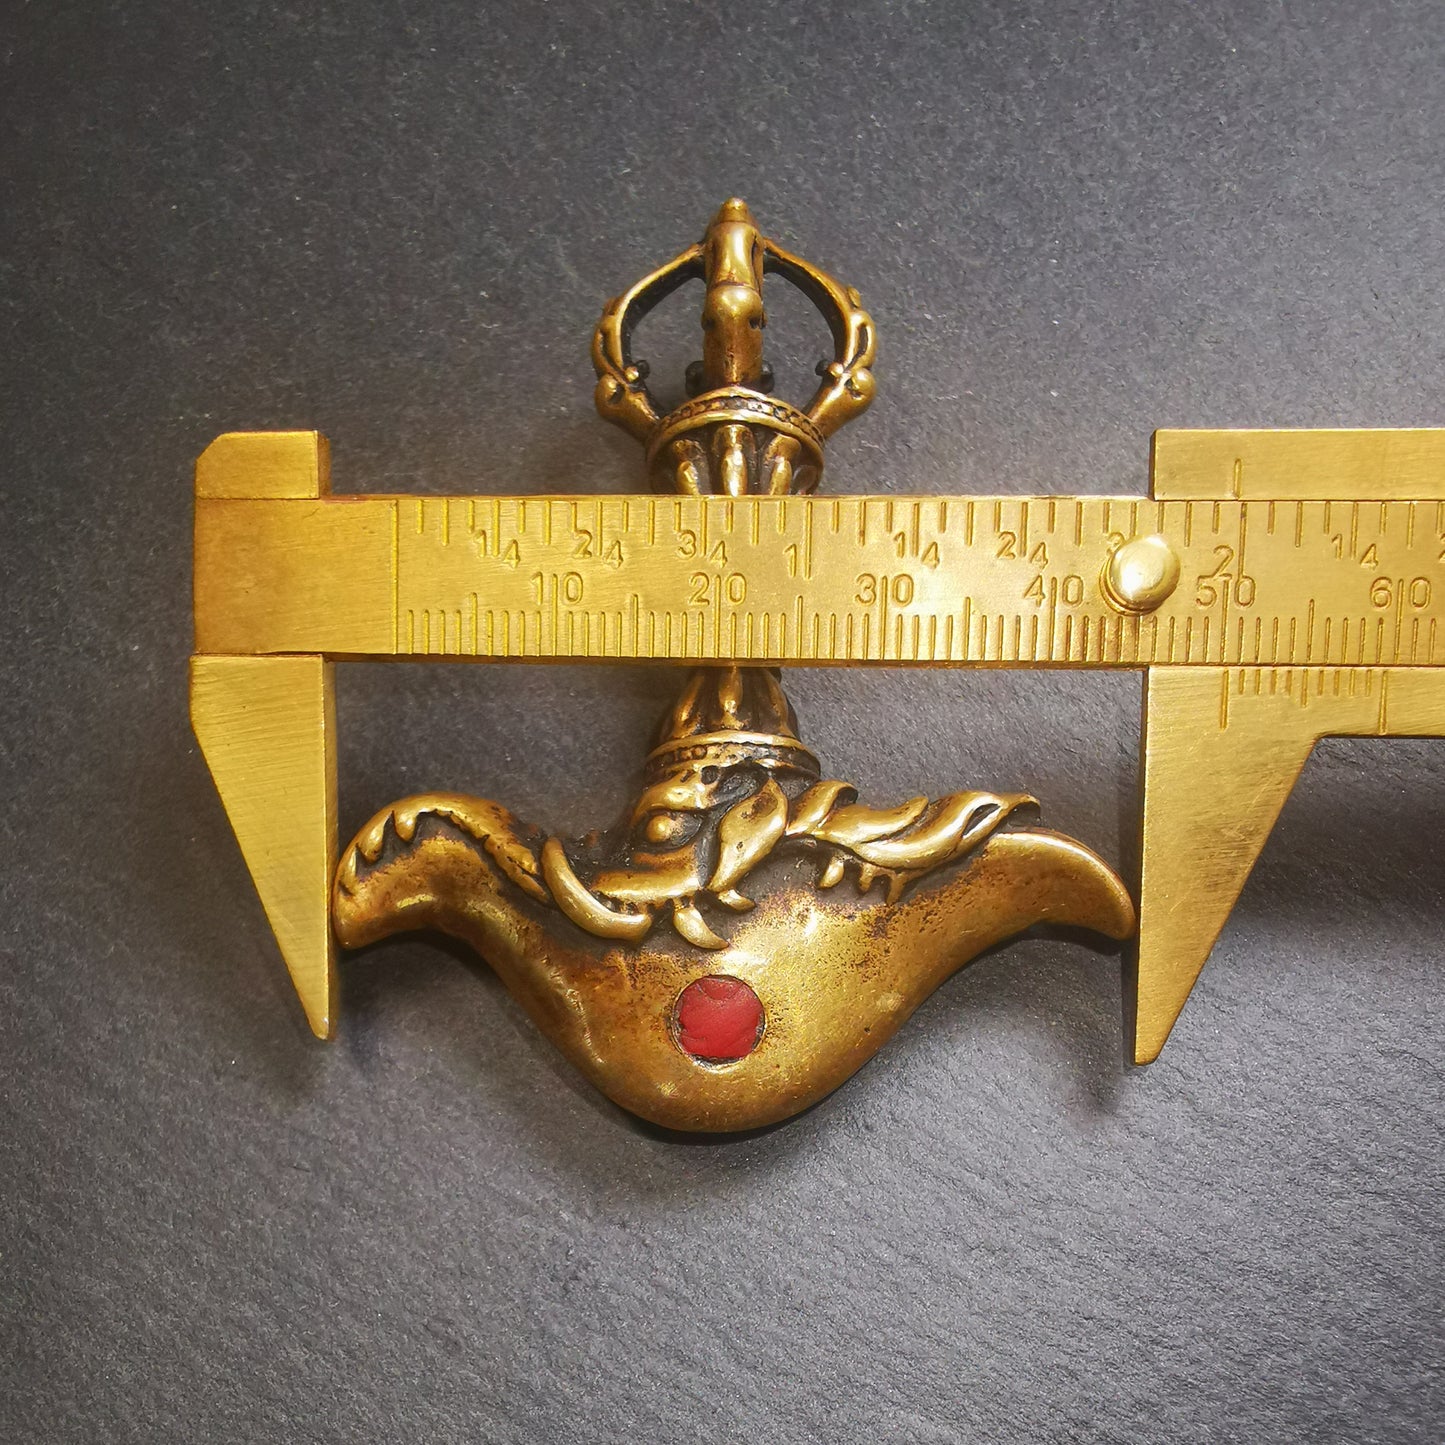 This kartika ritual was collected from Gengqing monastery,Derge Tibet,about 30 years. It's made of brass, inlaid agate,the upper part is a half vajra,and the size is 1.34 × 0.67 inches. You can put it in your shrine.